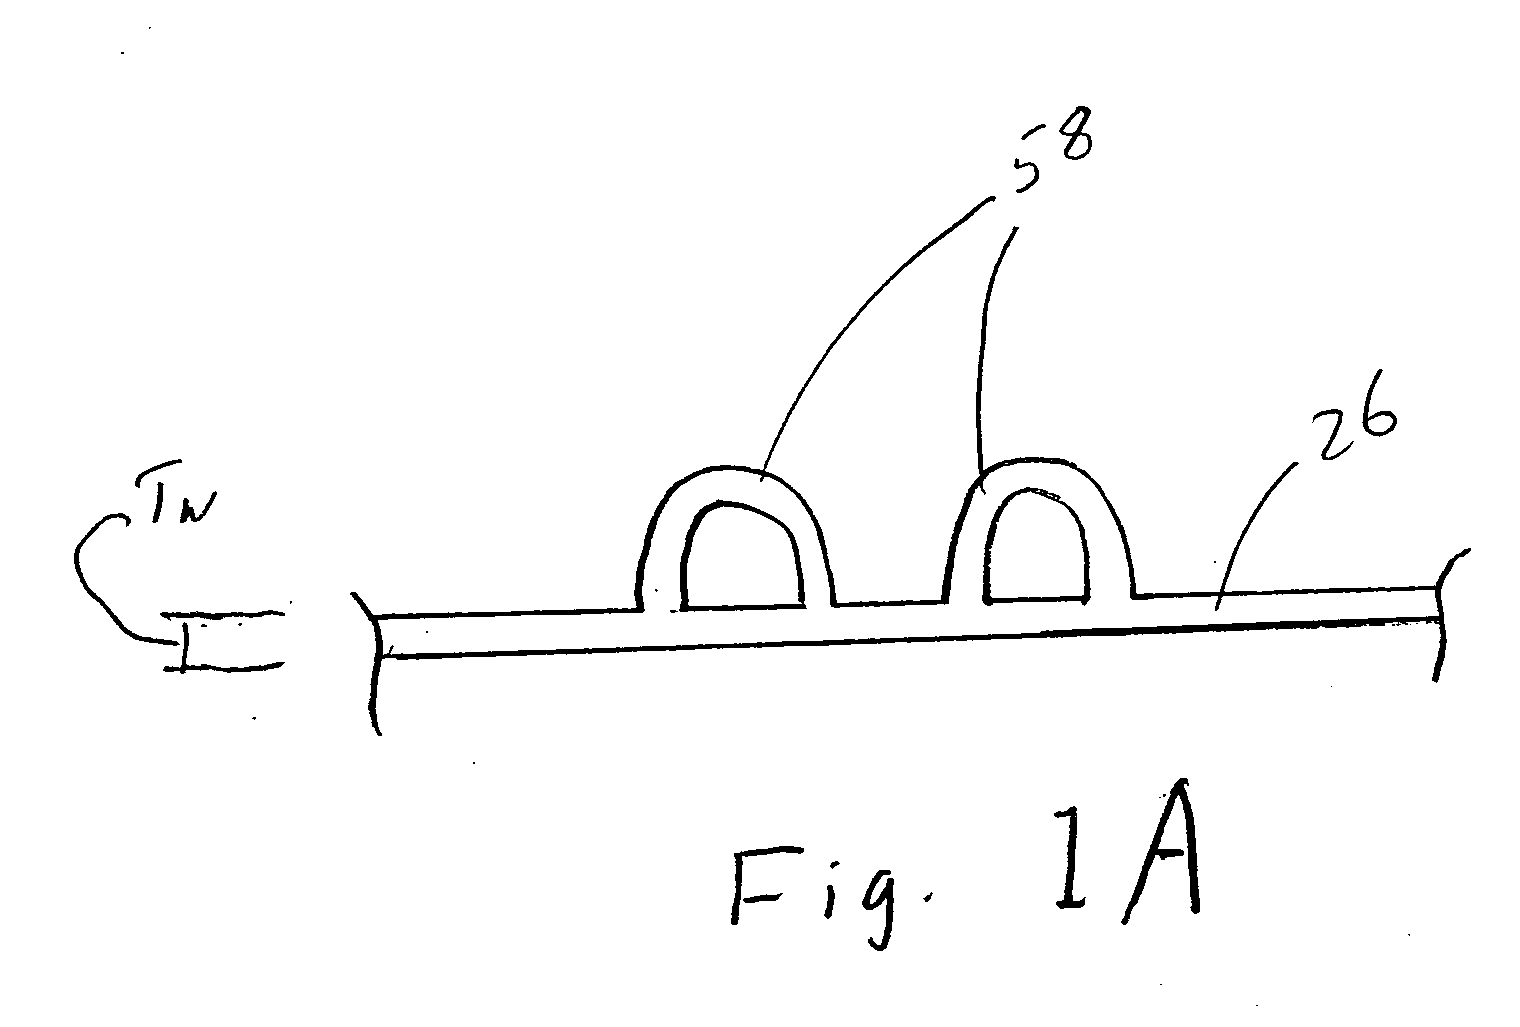 Seating system and method of forming same